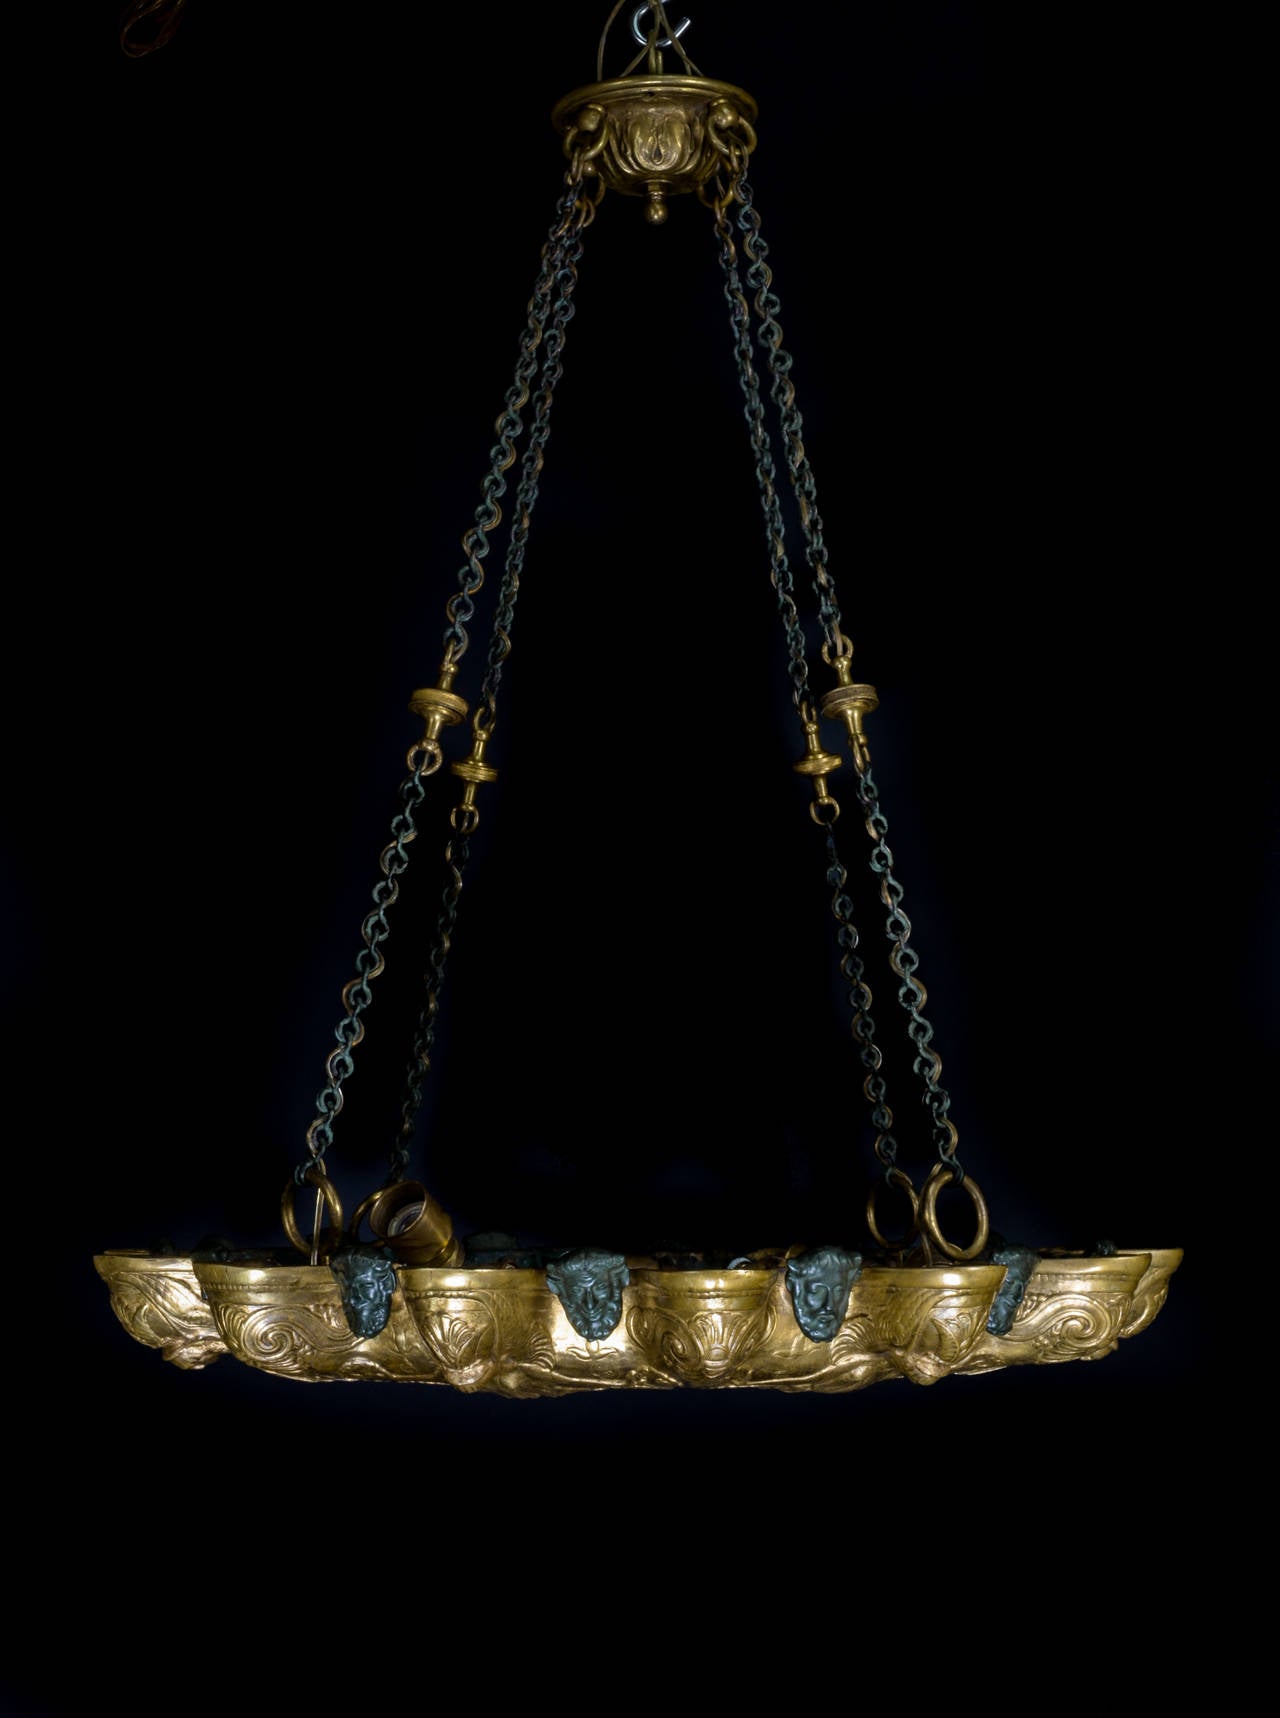 A Unique Antique American Neoclassical Gilt & Patinated Bronze multi light dish chandelier embellished with figural masks, neoclassical motifs & finally adorned with a central plaque, By E.F. Caldwell.